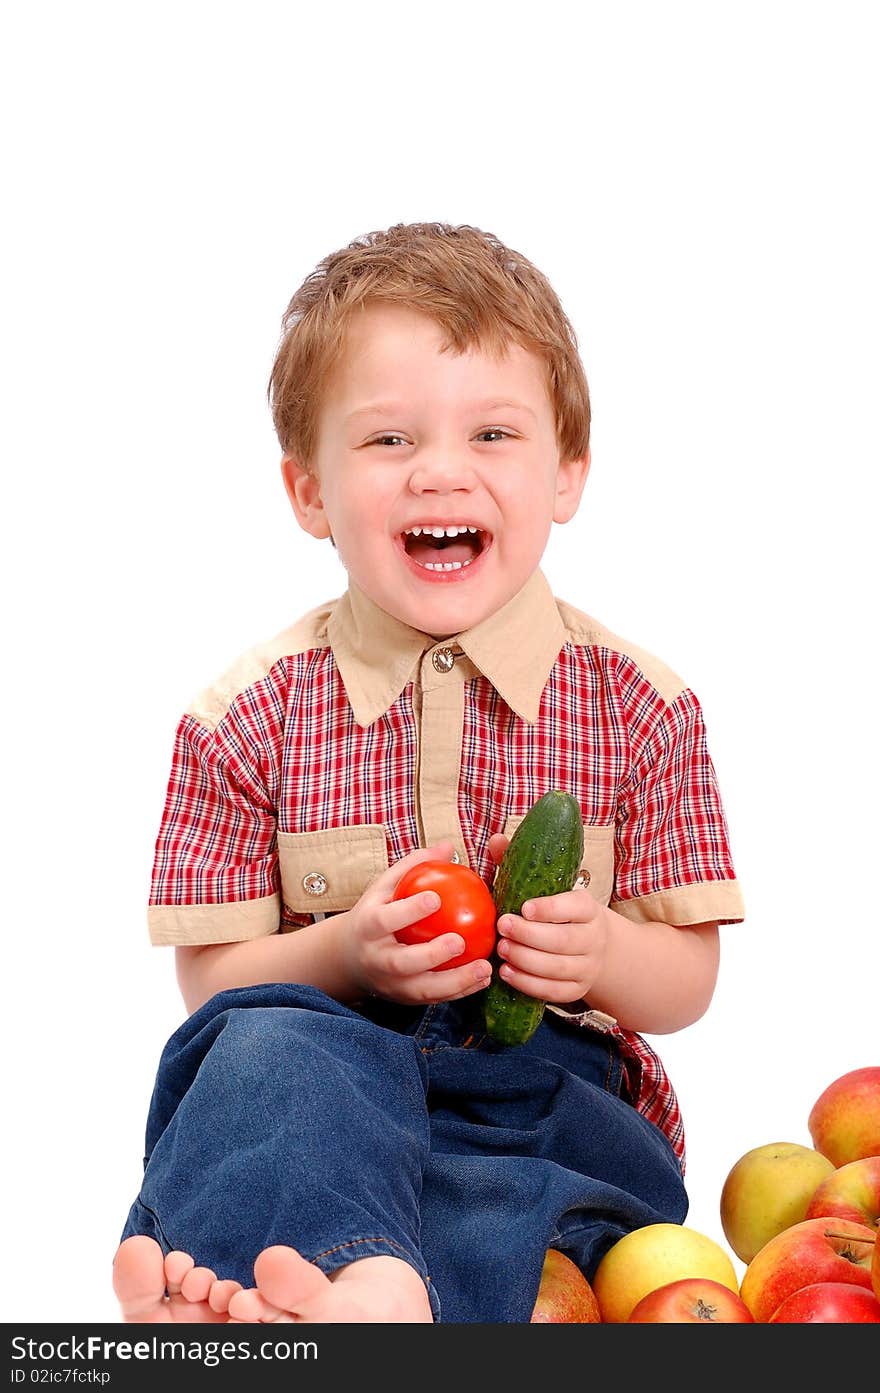 The little boy with fruit and vegetables isolated on white background